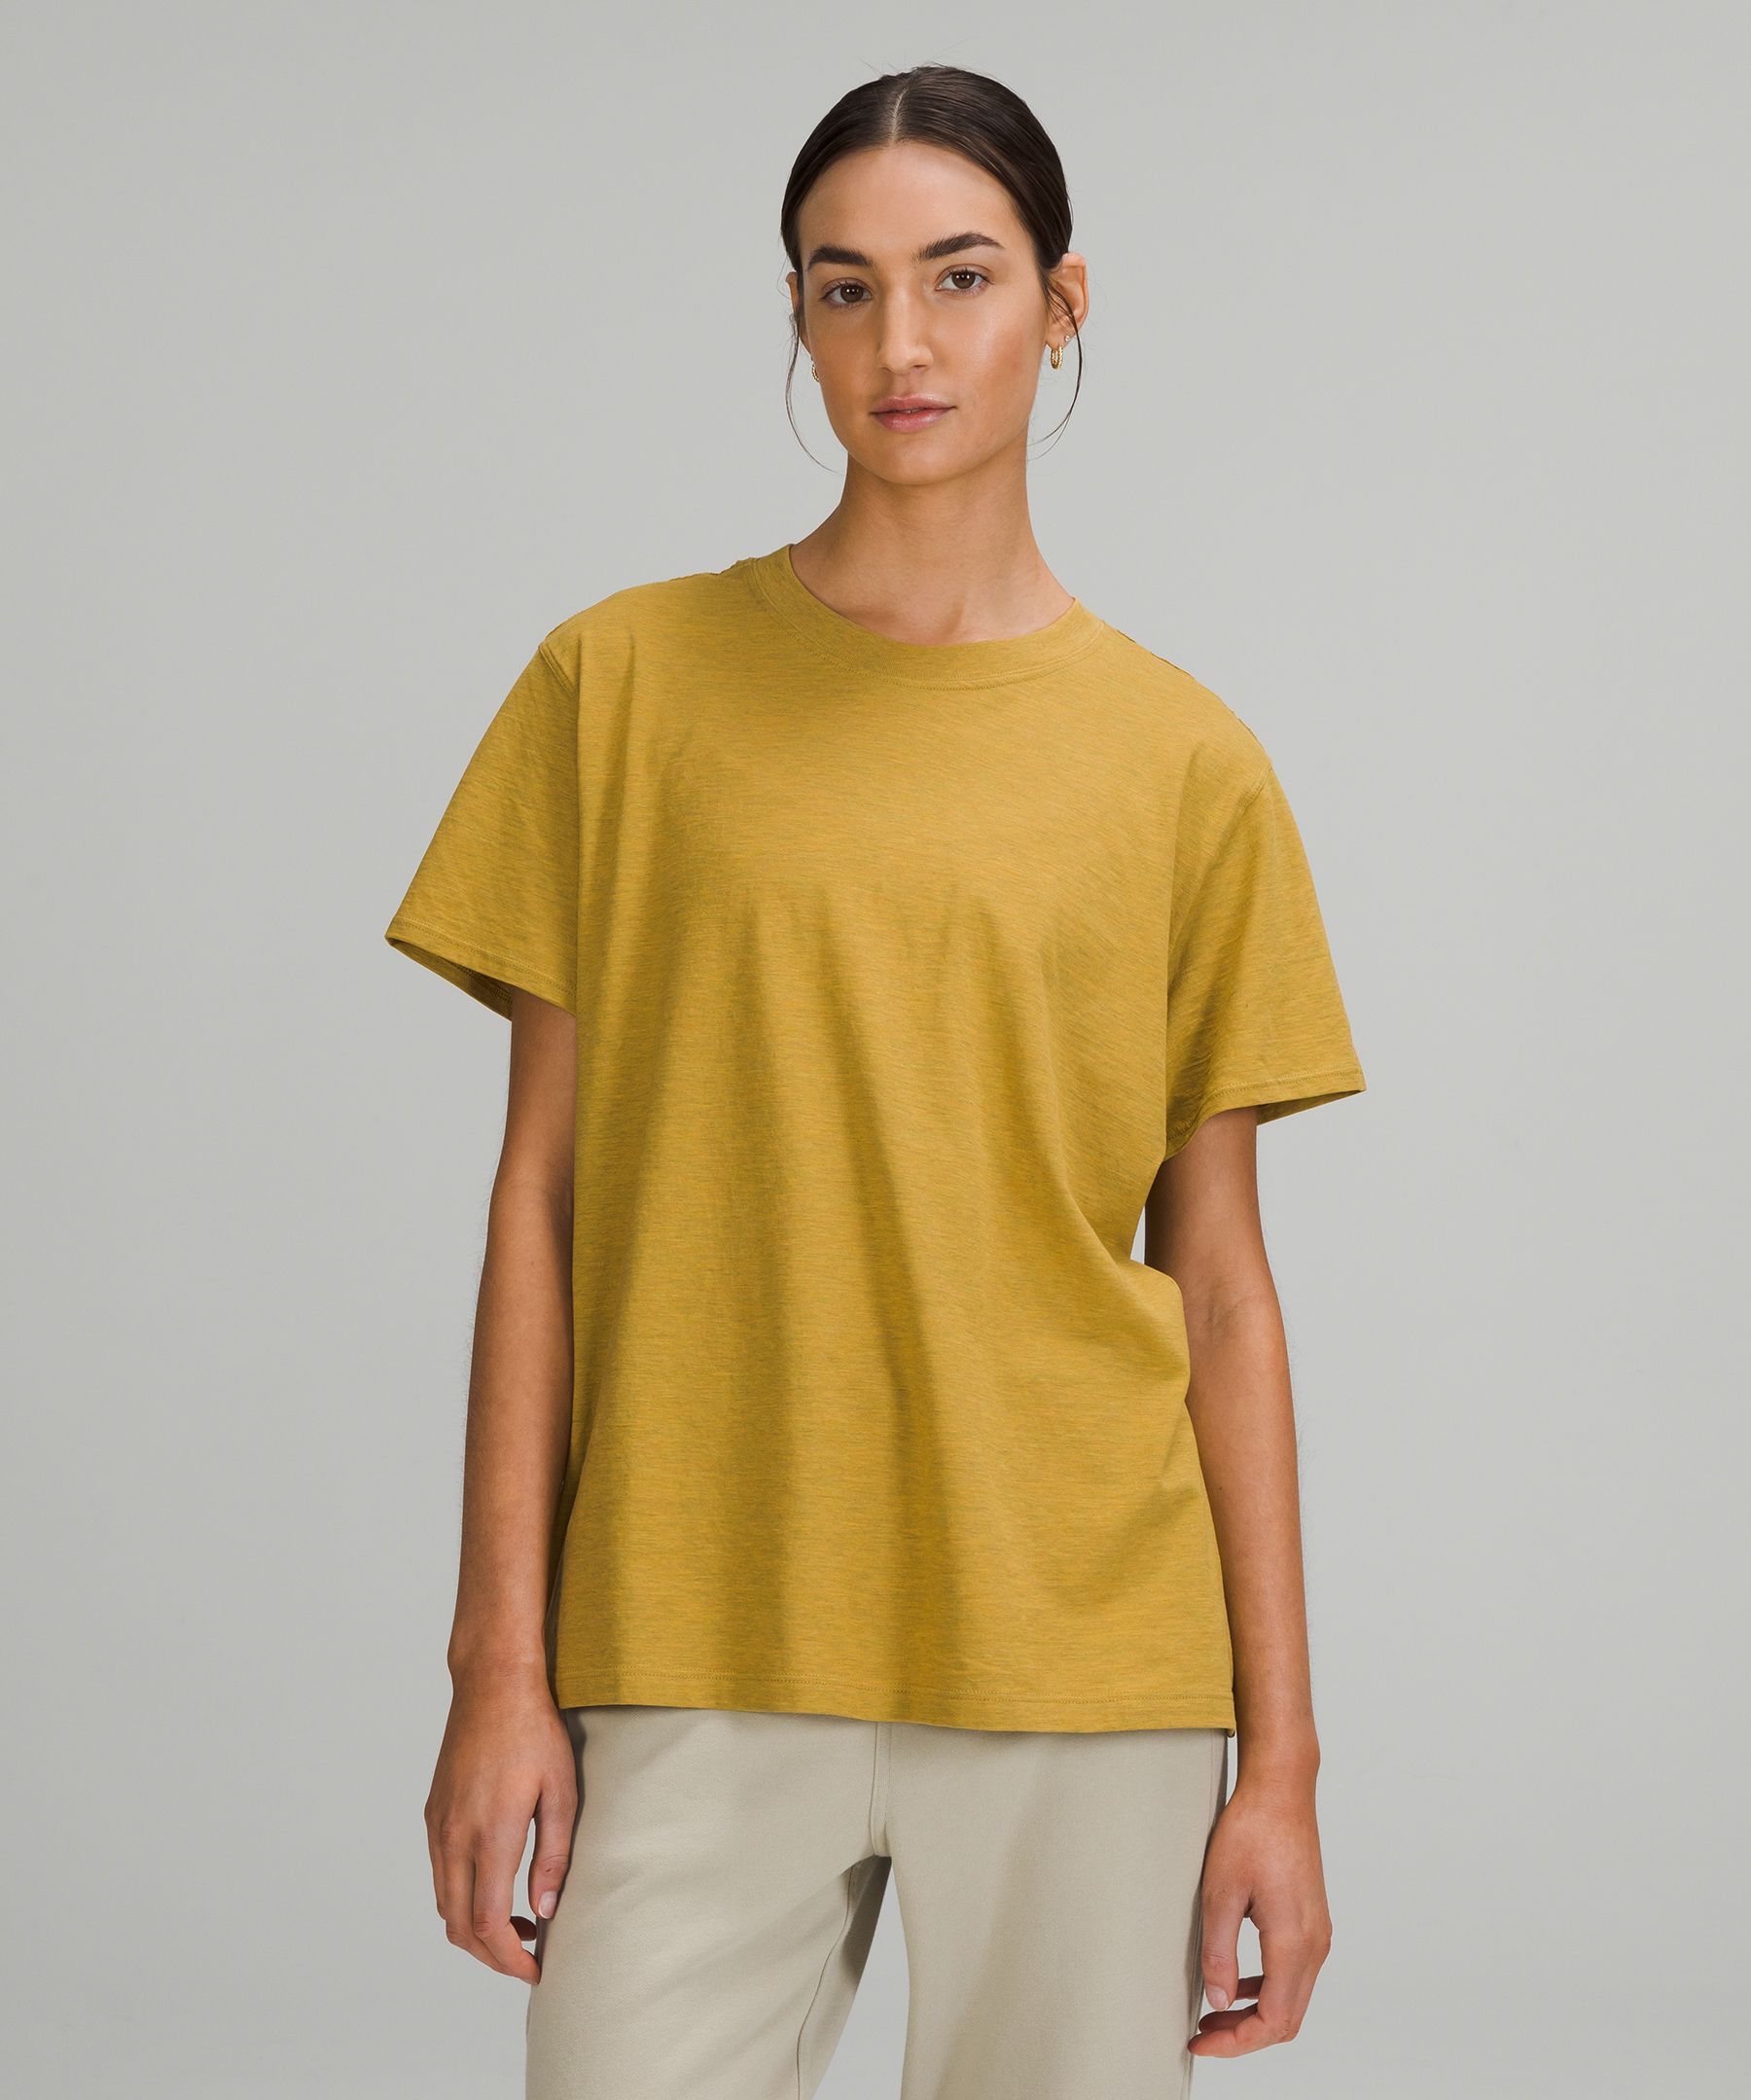 Lululemon All Yours Short Sleeve T-shirt In Heathered Auric Gold